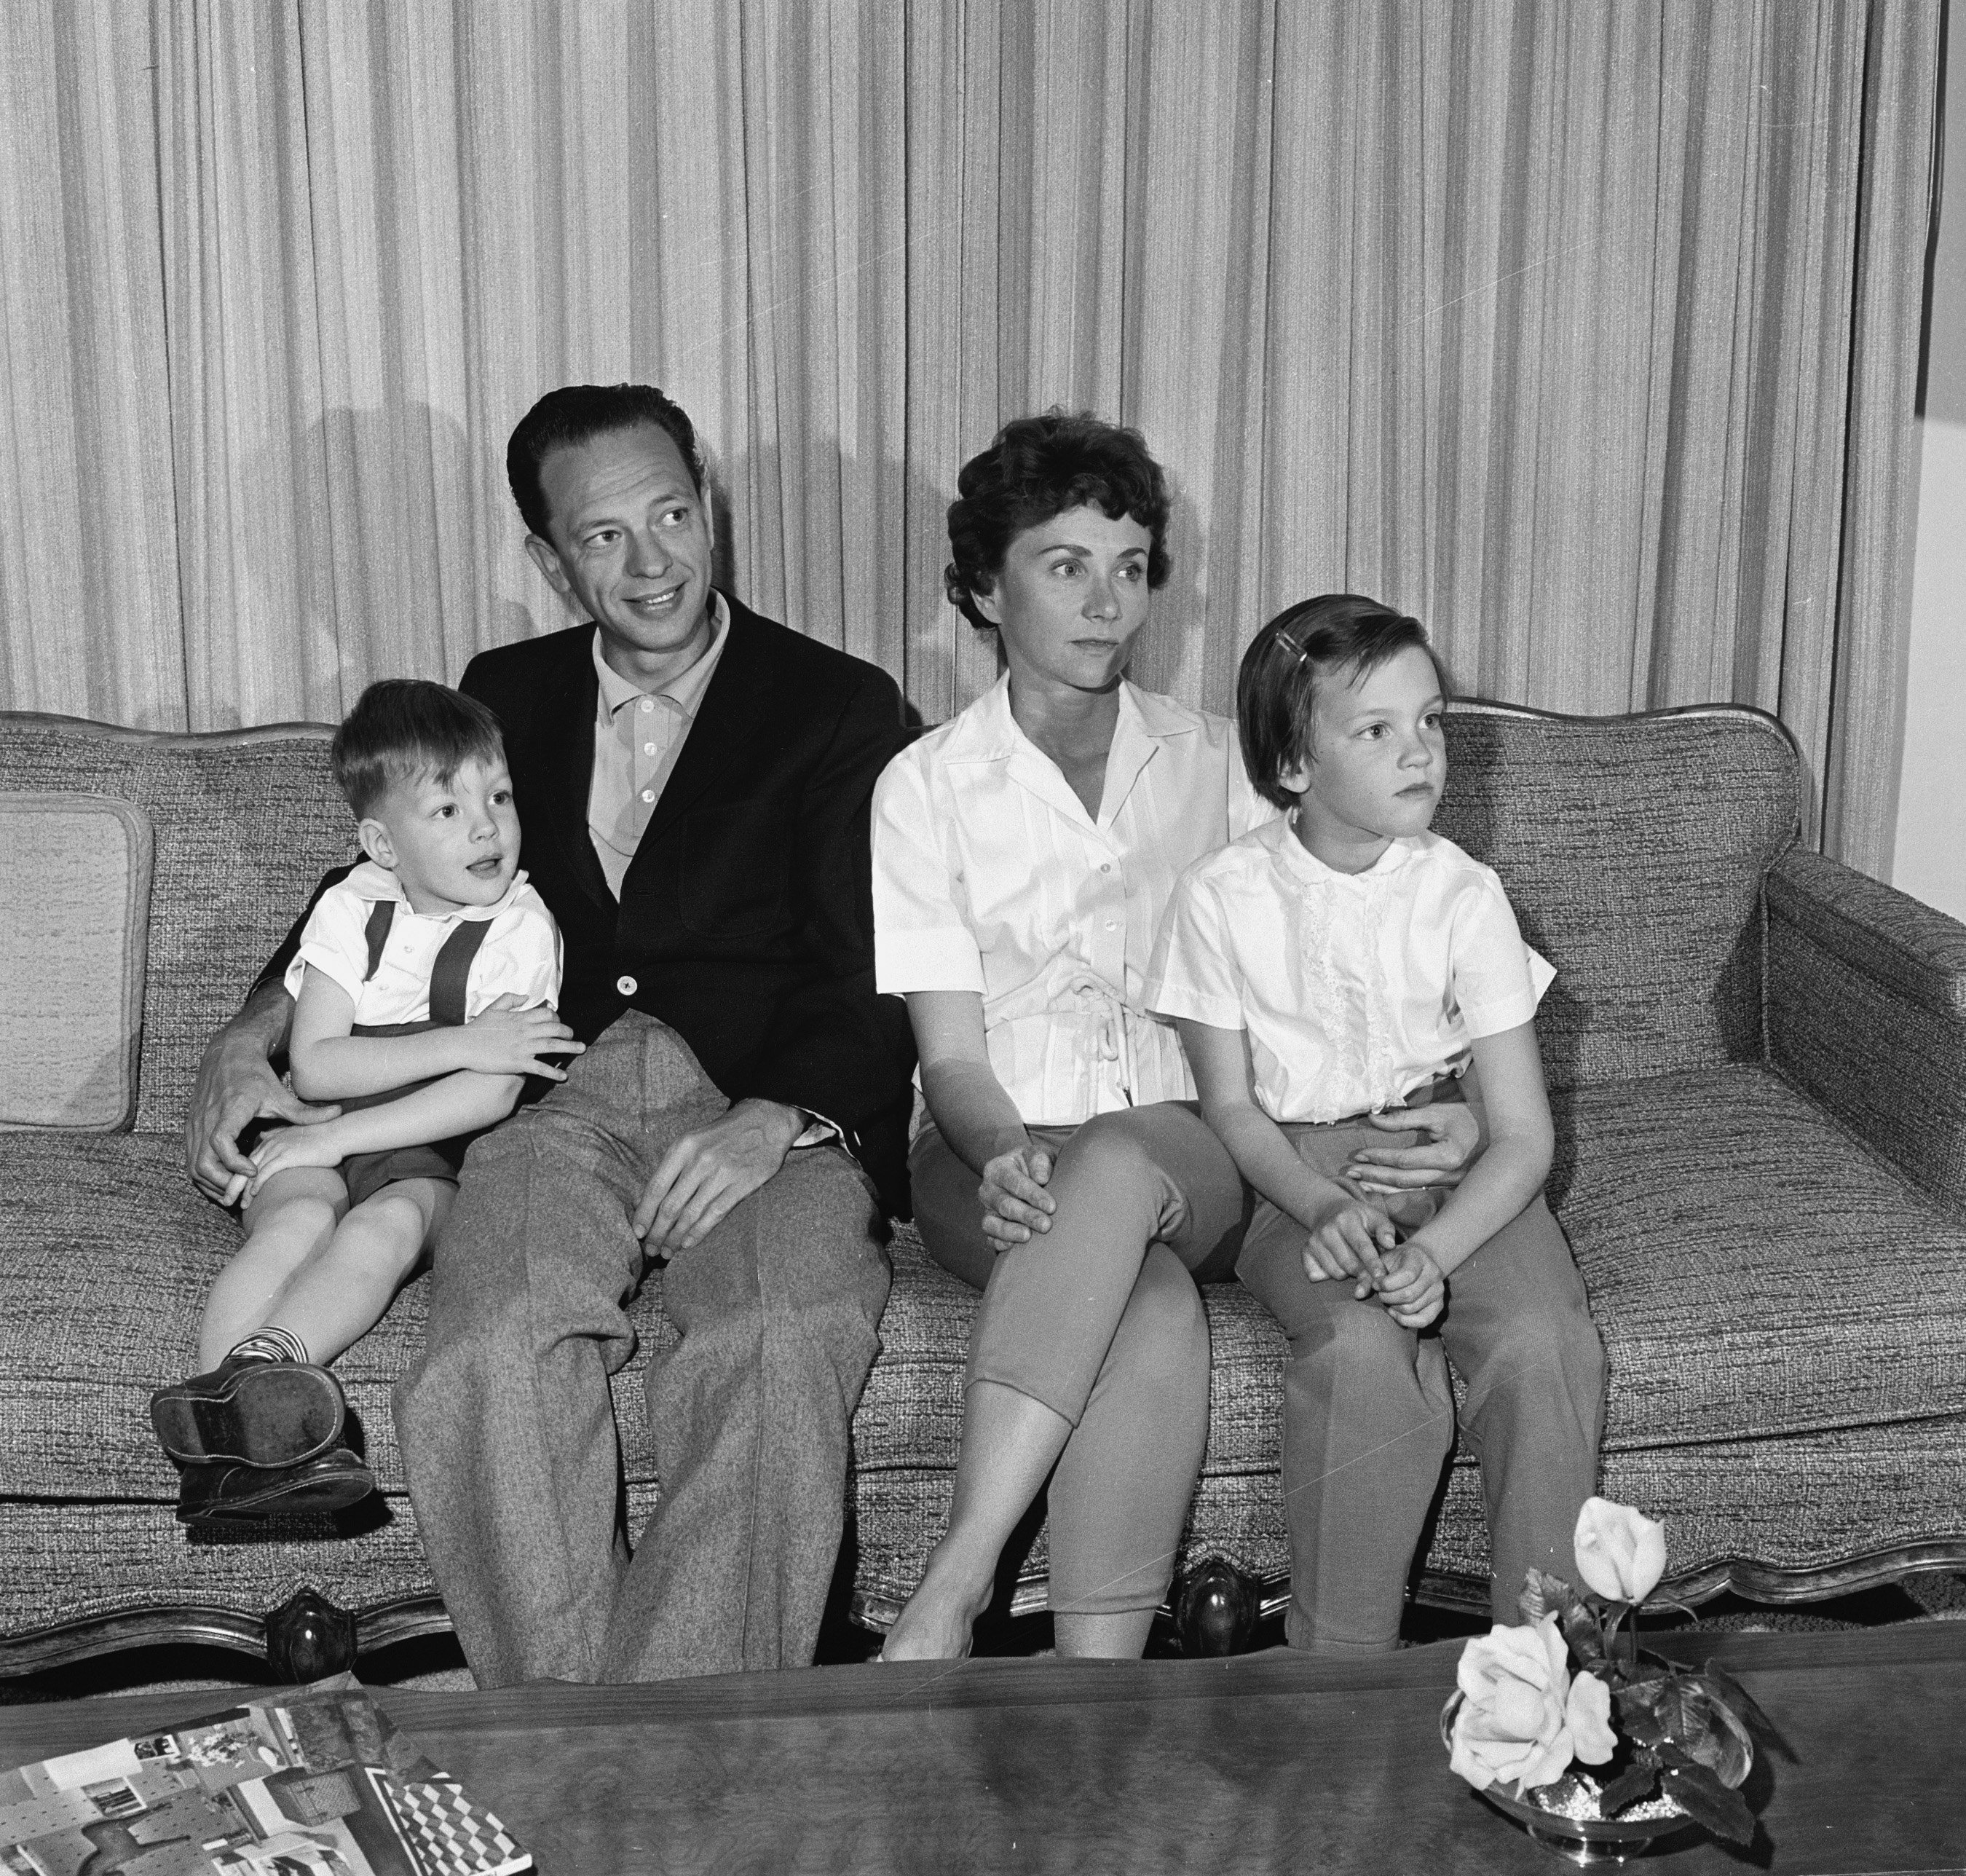 Don Knotts,his wife Kay and their two children sit for a photo on a couch, 1961